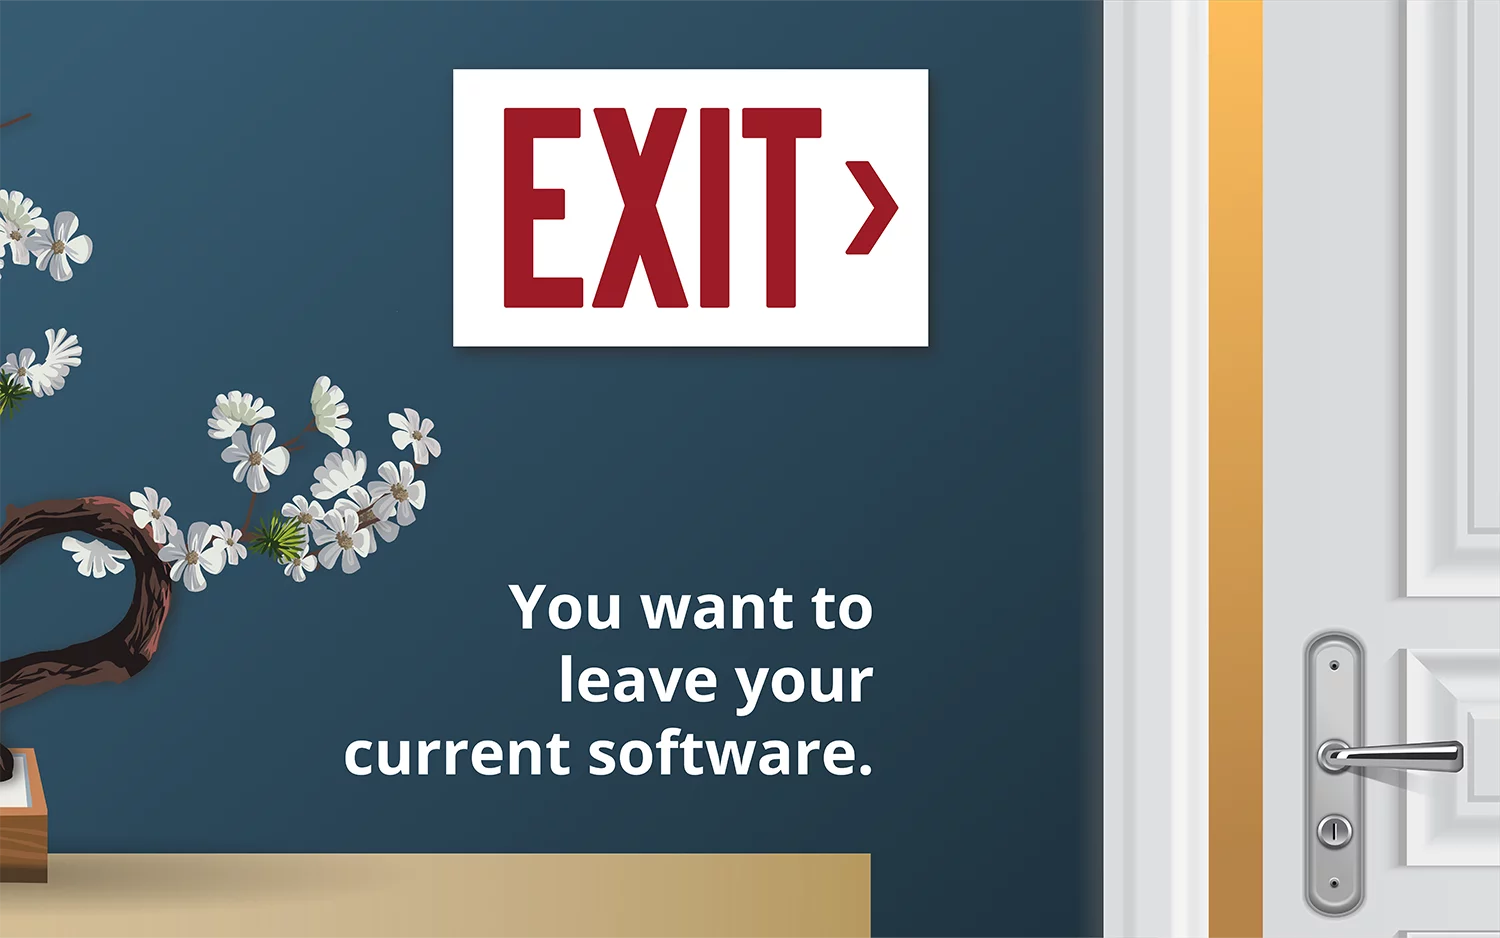 illustration of a desk with part of a bonsai cherry tree, exit sign, wall art saying "you want to leave your current software", and a partially open door with handle